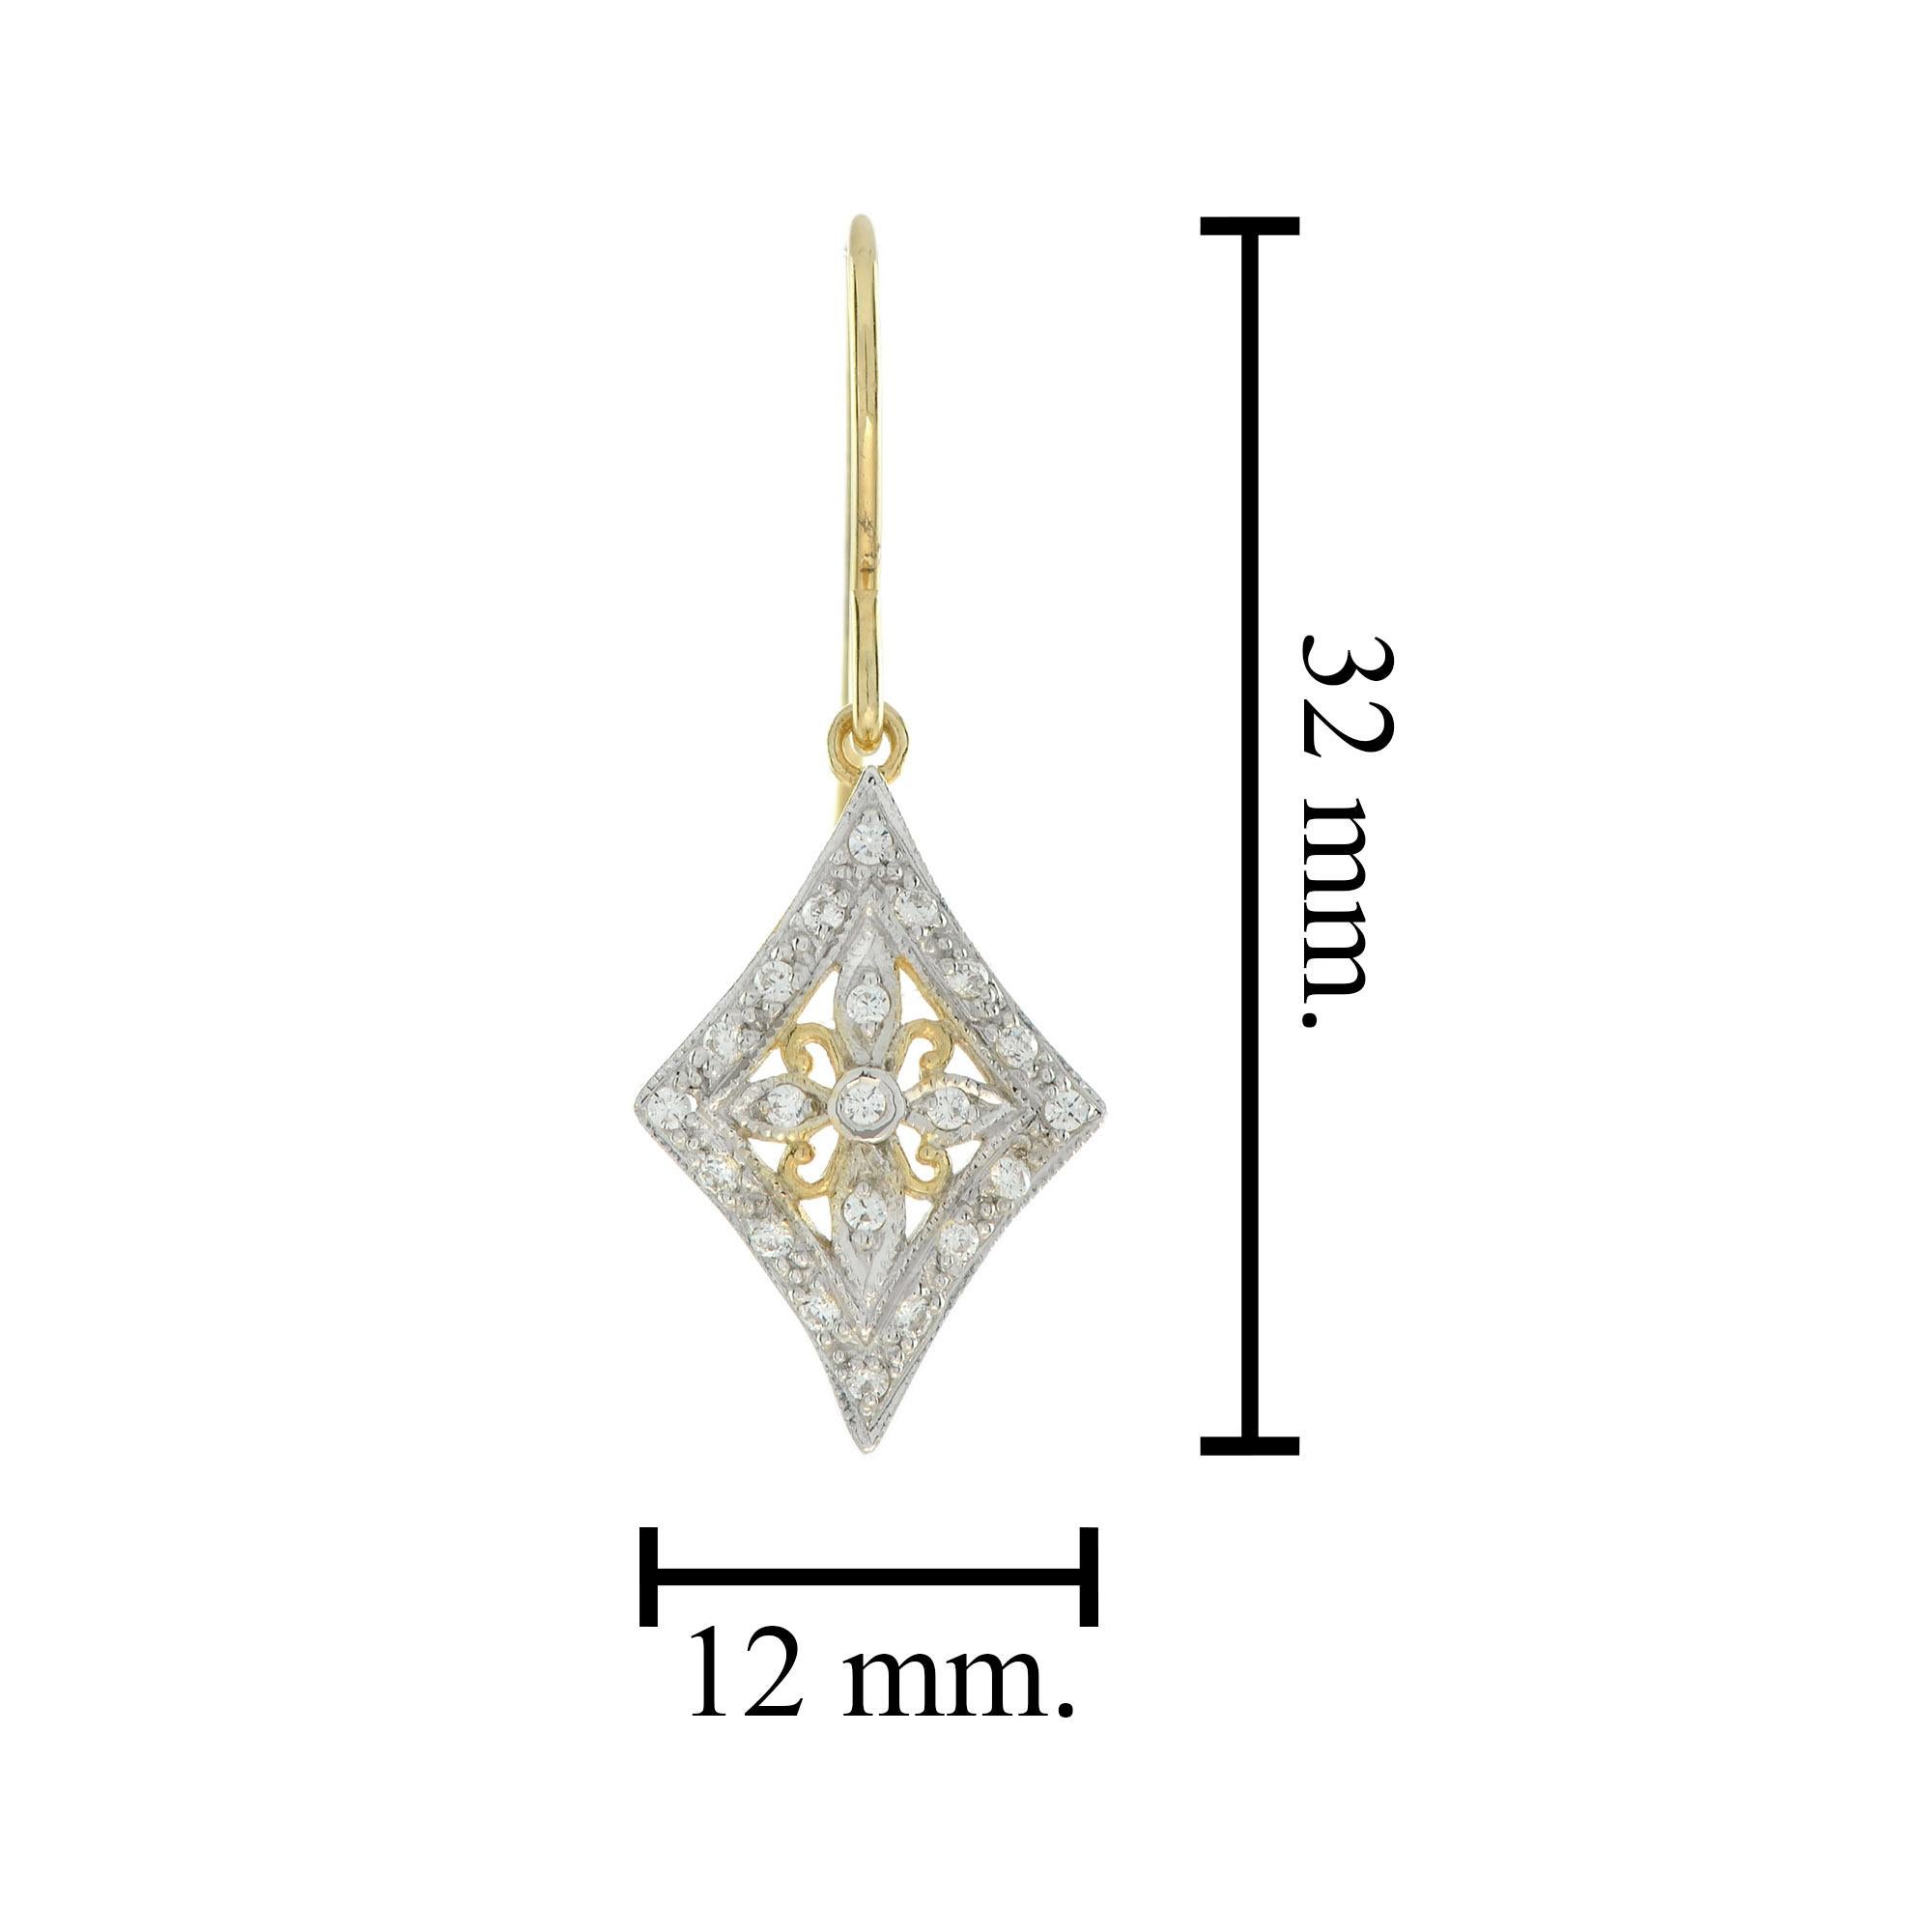 Vintage Style Diamond Floral Diamond Shape Filigree Earrings in 14K Yellow Gold In New Condition For Sale In Bangkok, TH